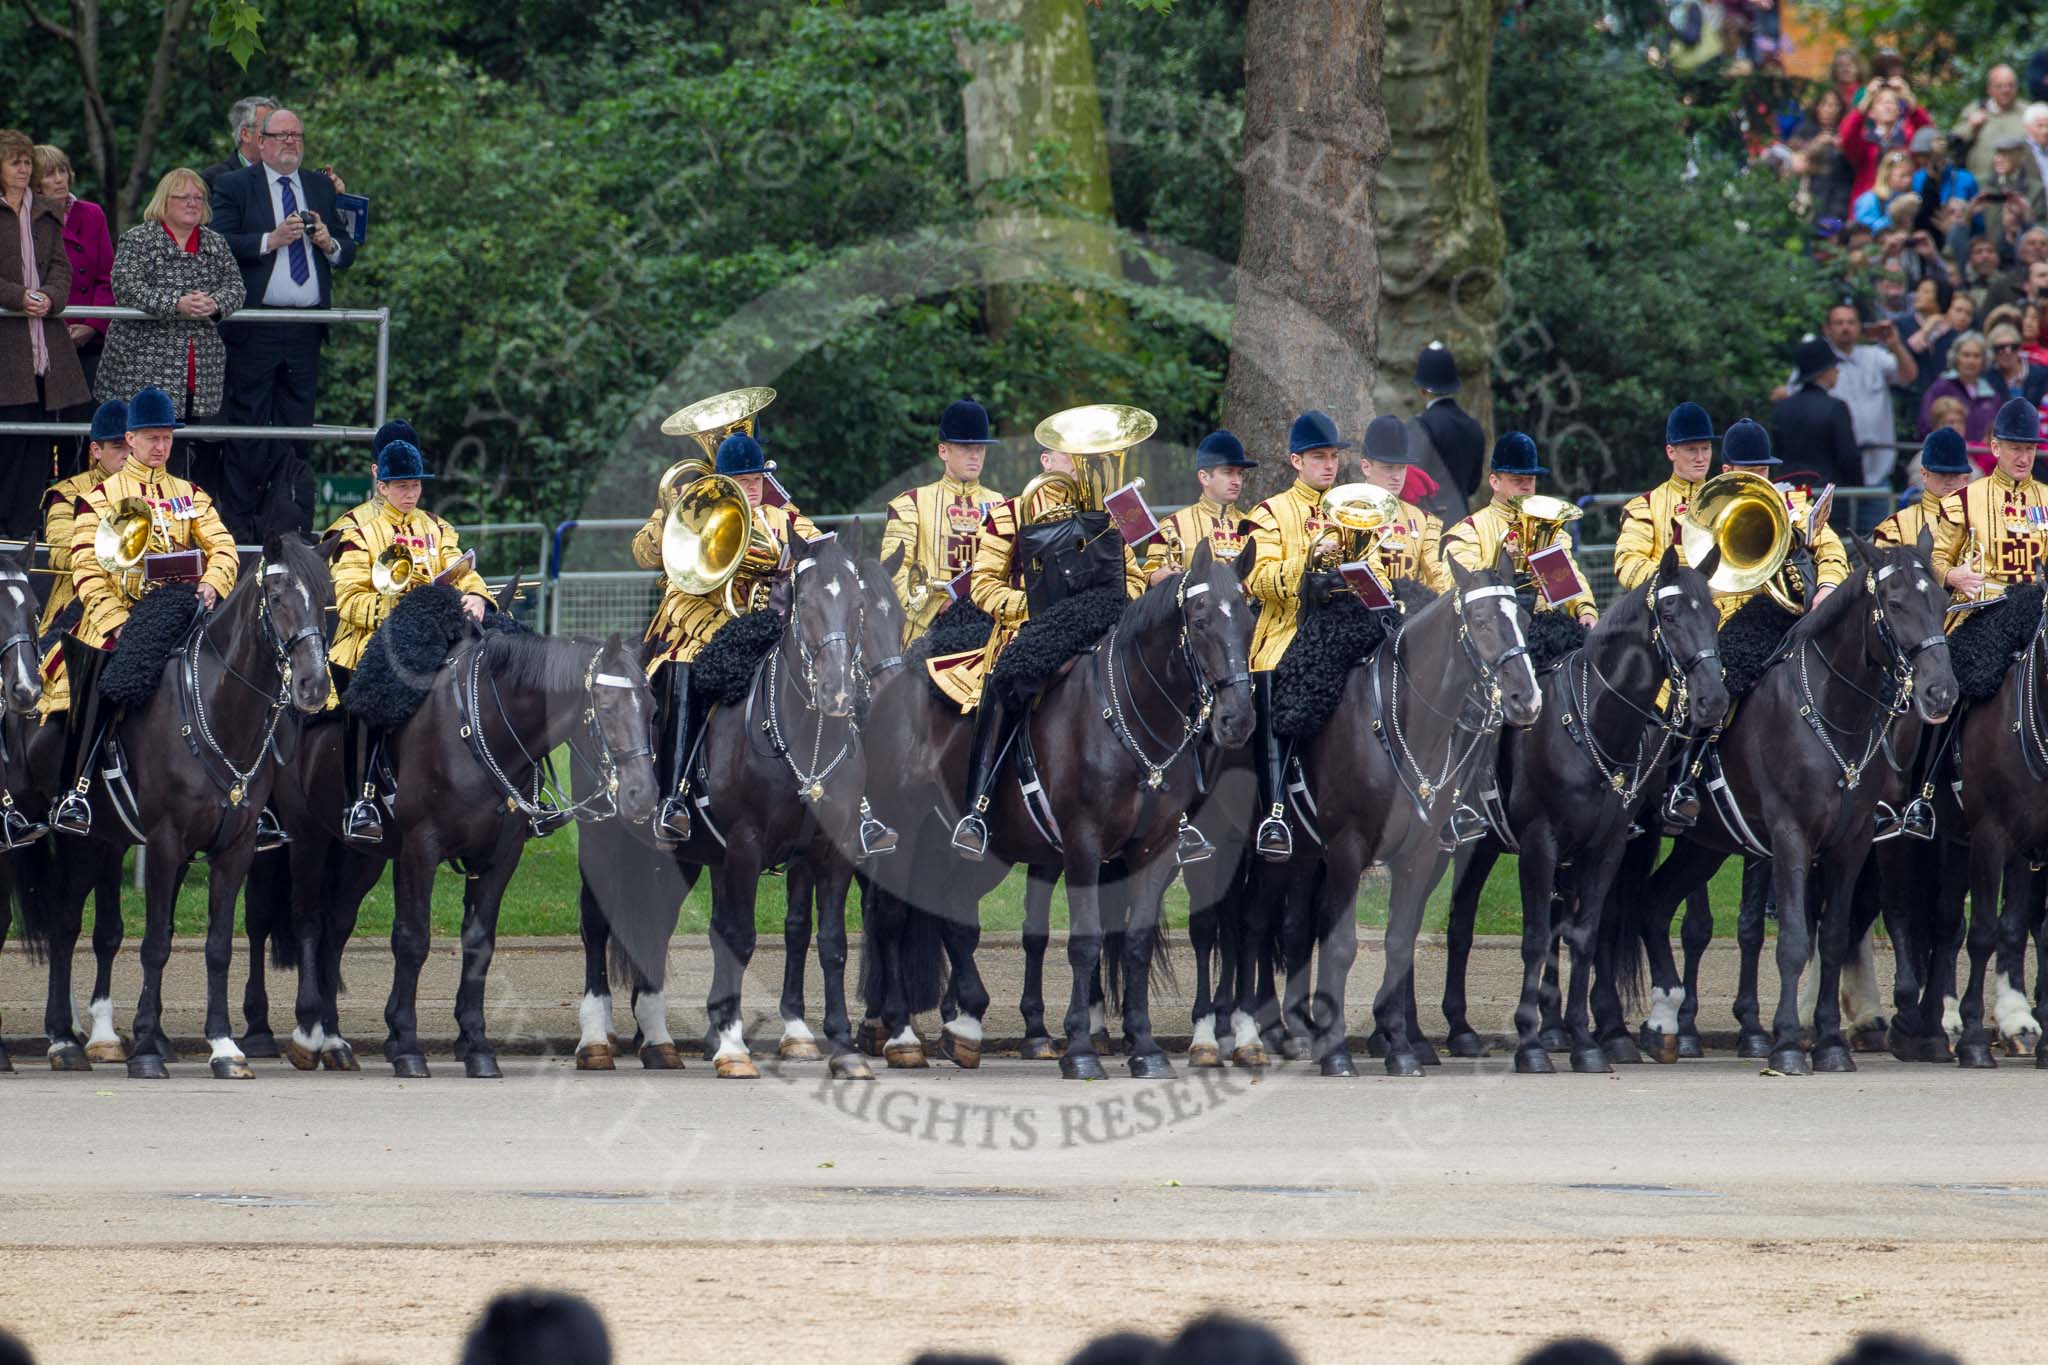 Trooping the Colour 2012: The Mounted Bands of the Household Cavalry during the March Past..
Horse Guards Parade, Westminster,
London SW1,

United Kingdom,
on 16 June 2012 at 11:41, image #463